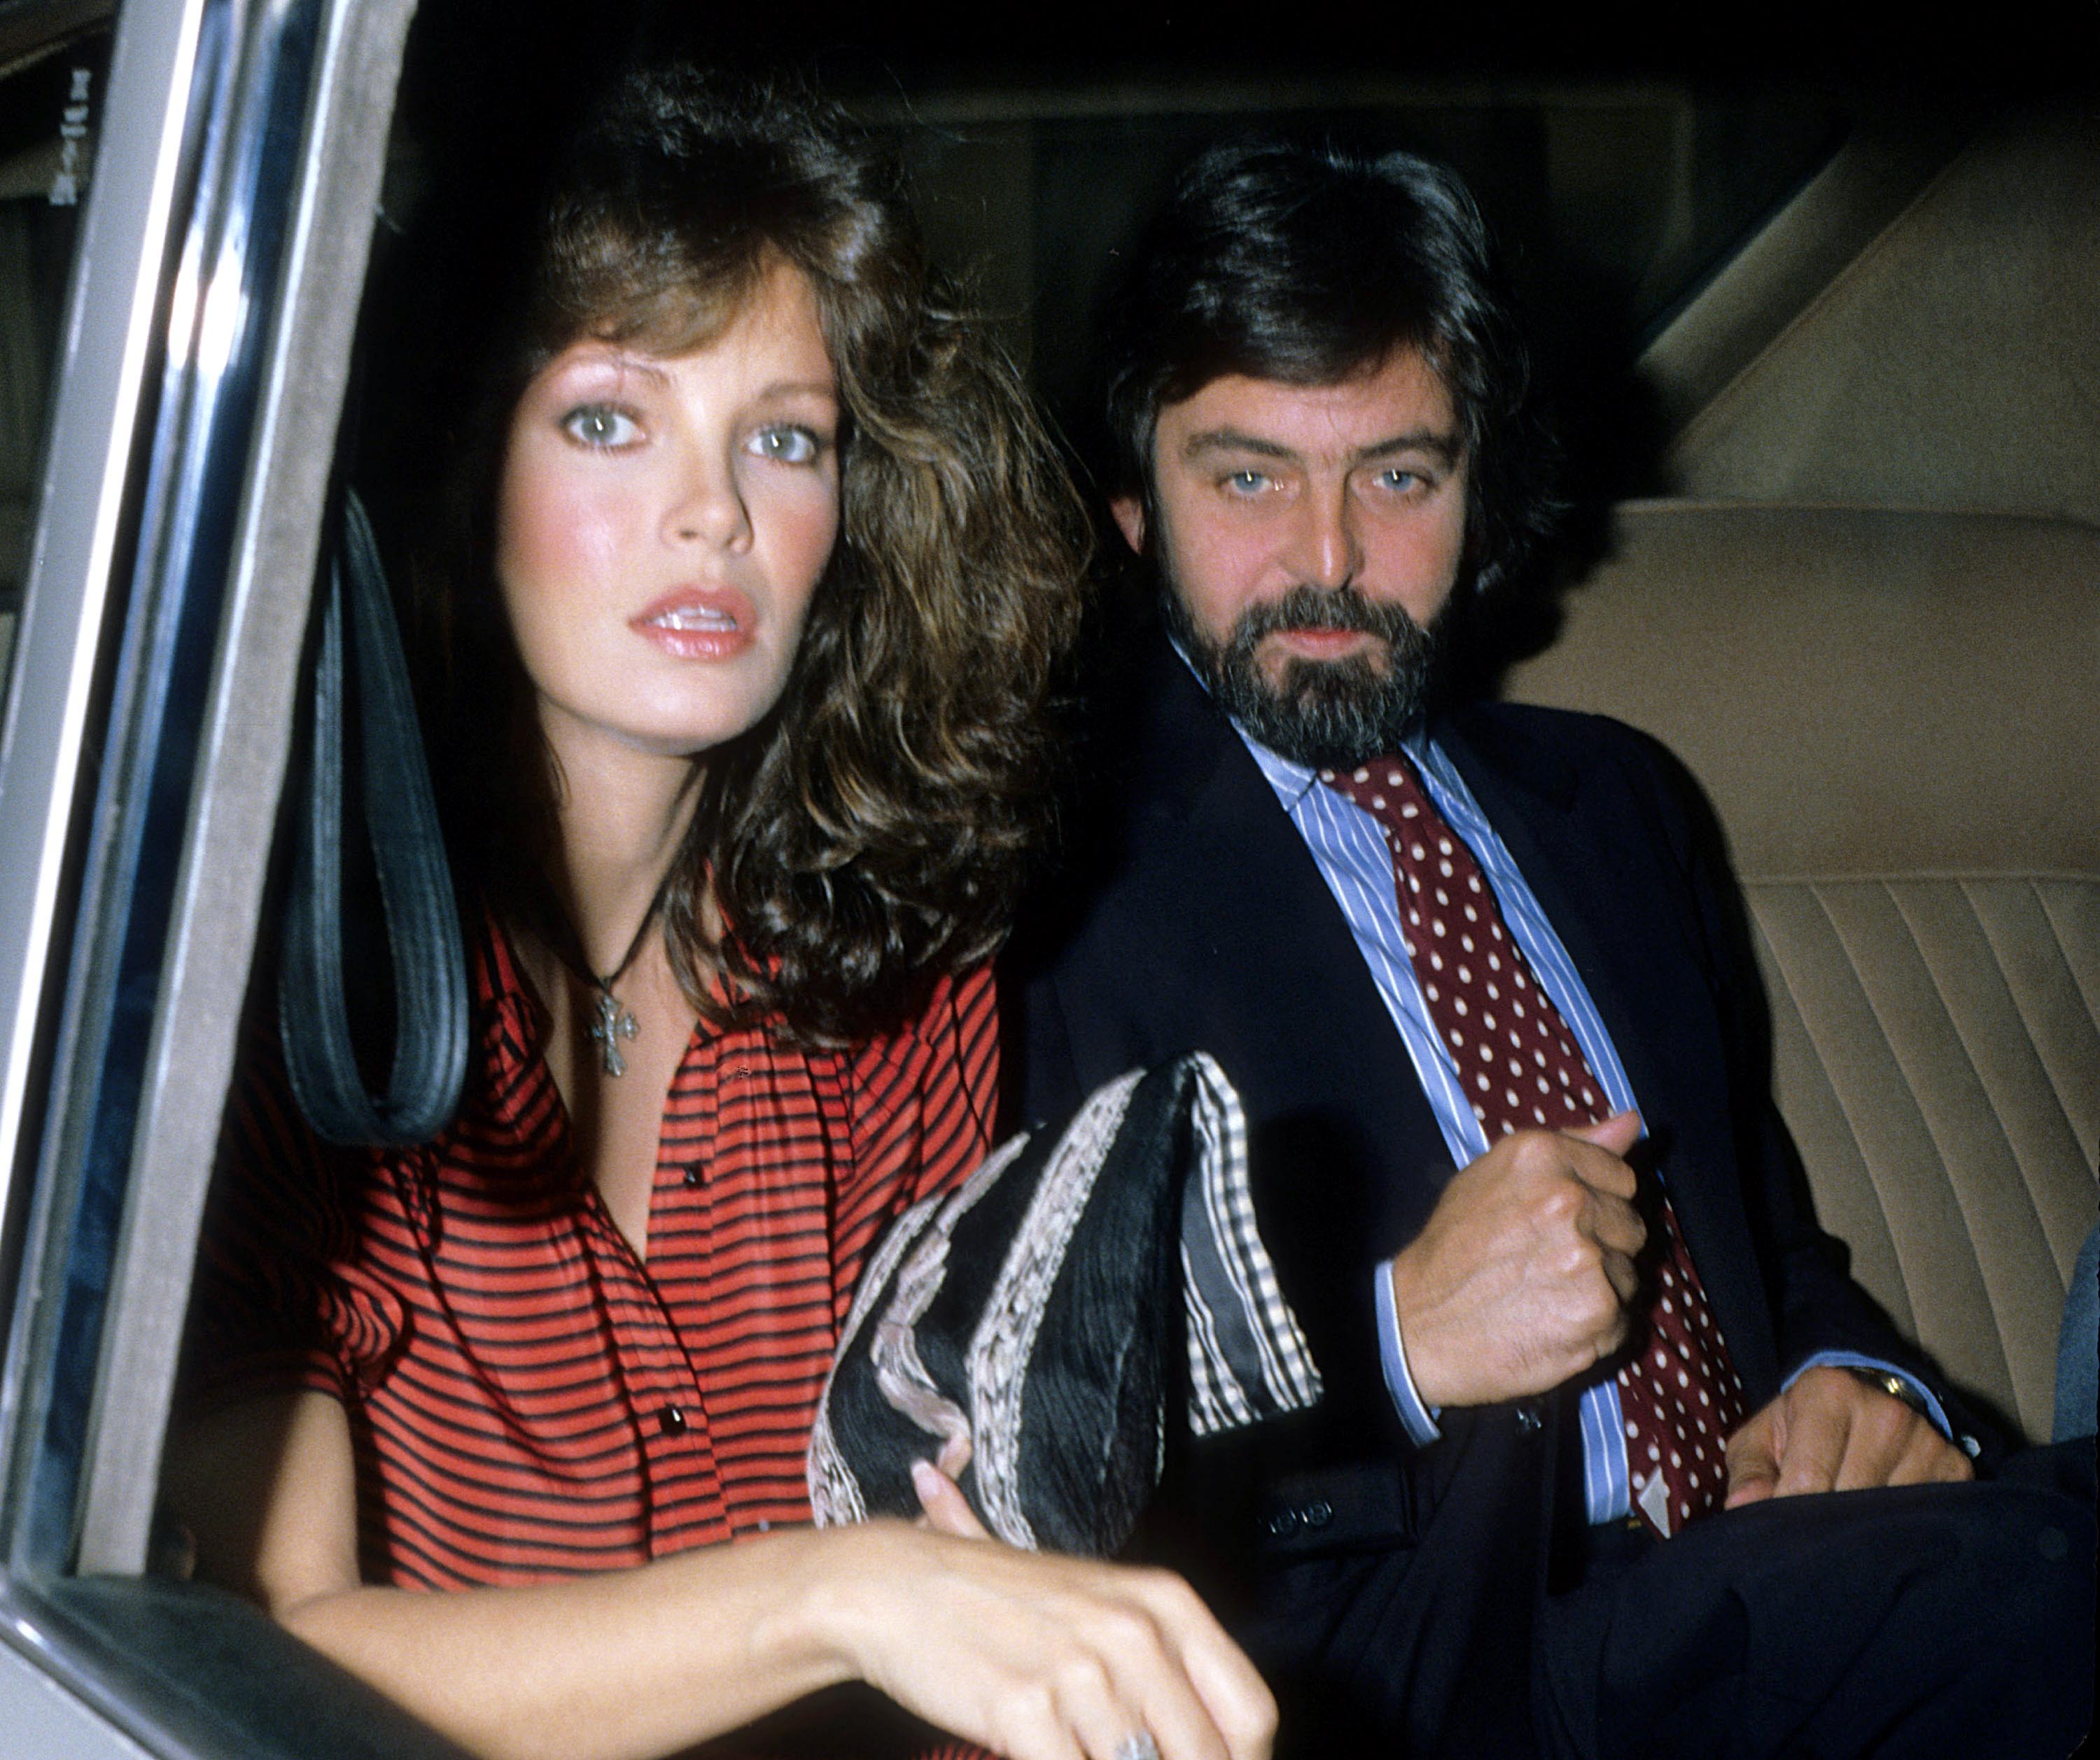 Jaclyn Smith and husband Tony Richmond during Jaclyn Smith Sighting in London - August 10, 1981 in London, Great Britain. | Source: Getty Images